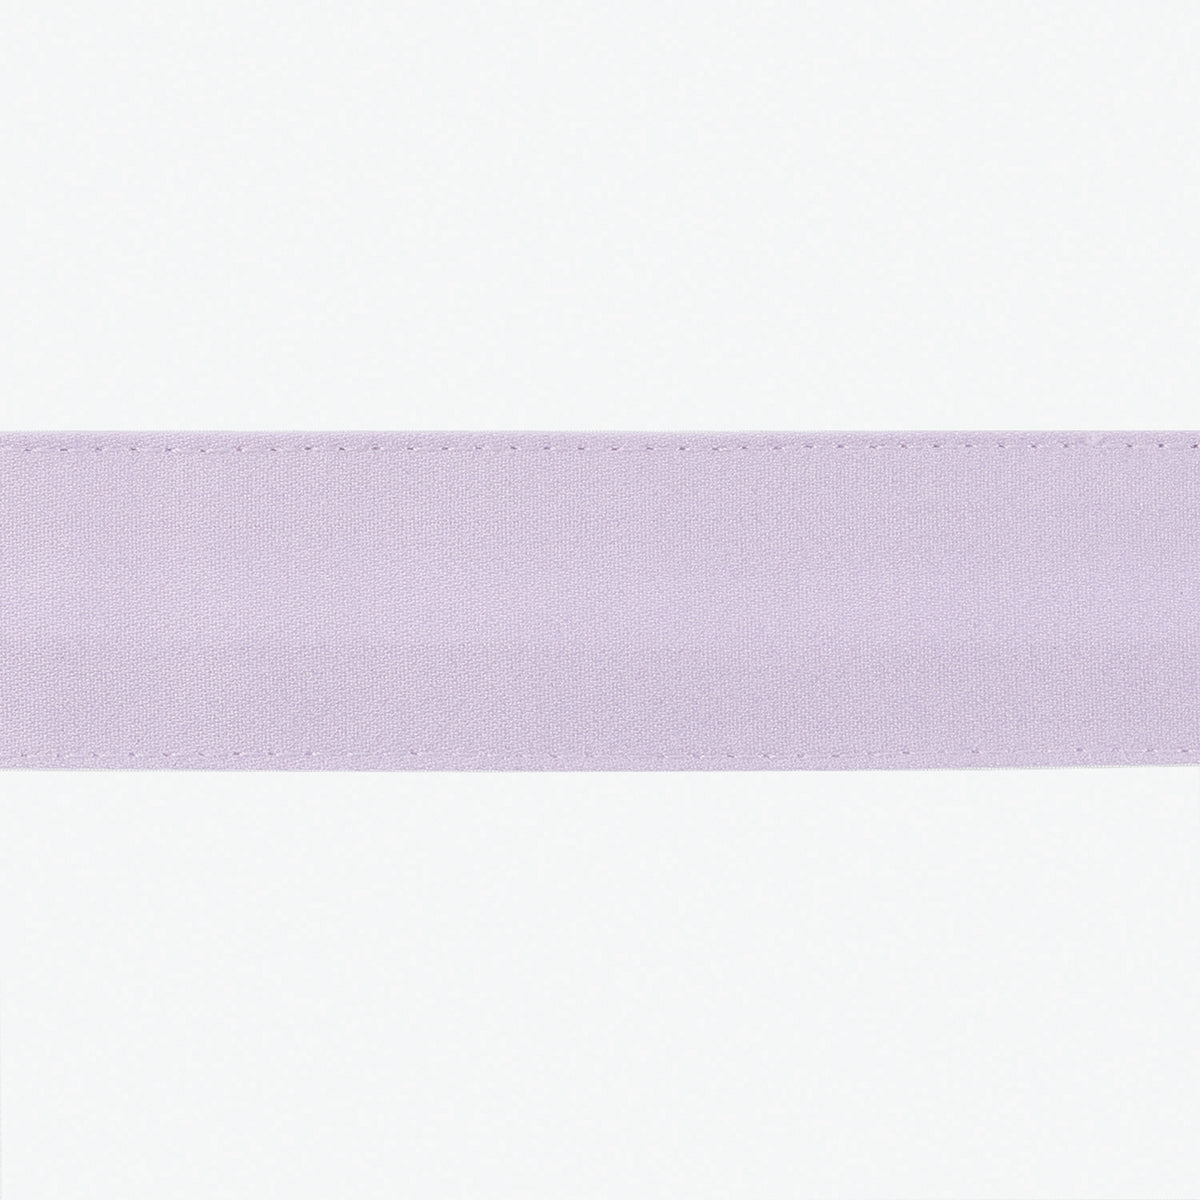 Swatch Sample of Matouk Lowell Tissue Box Cover in Color Violet